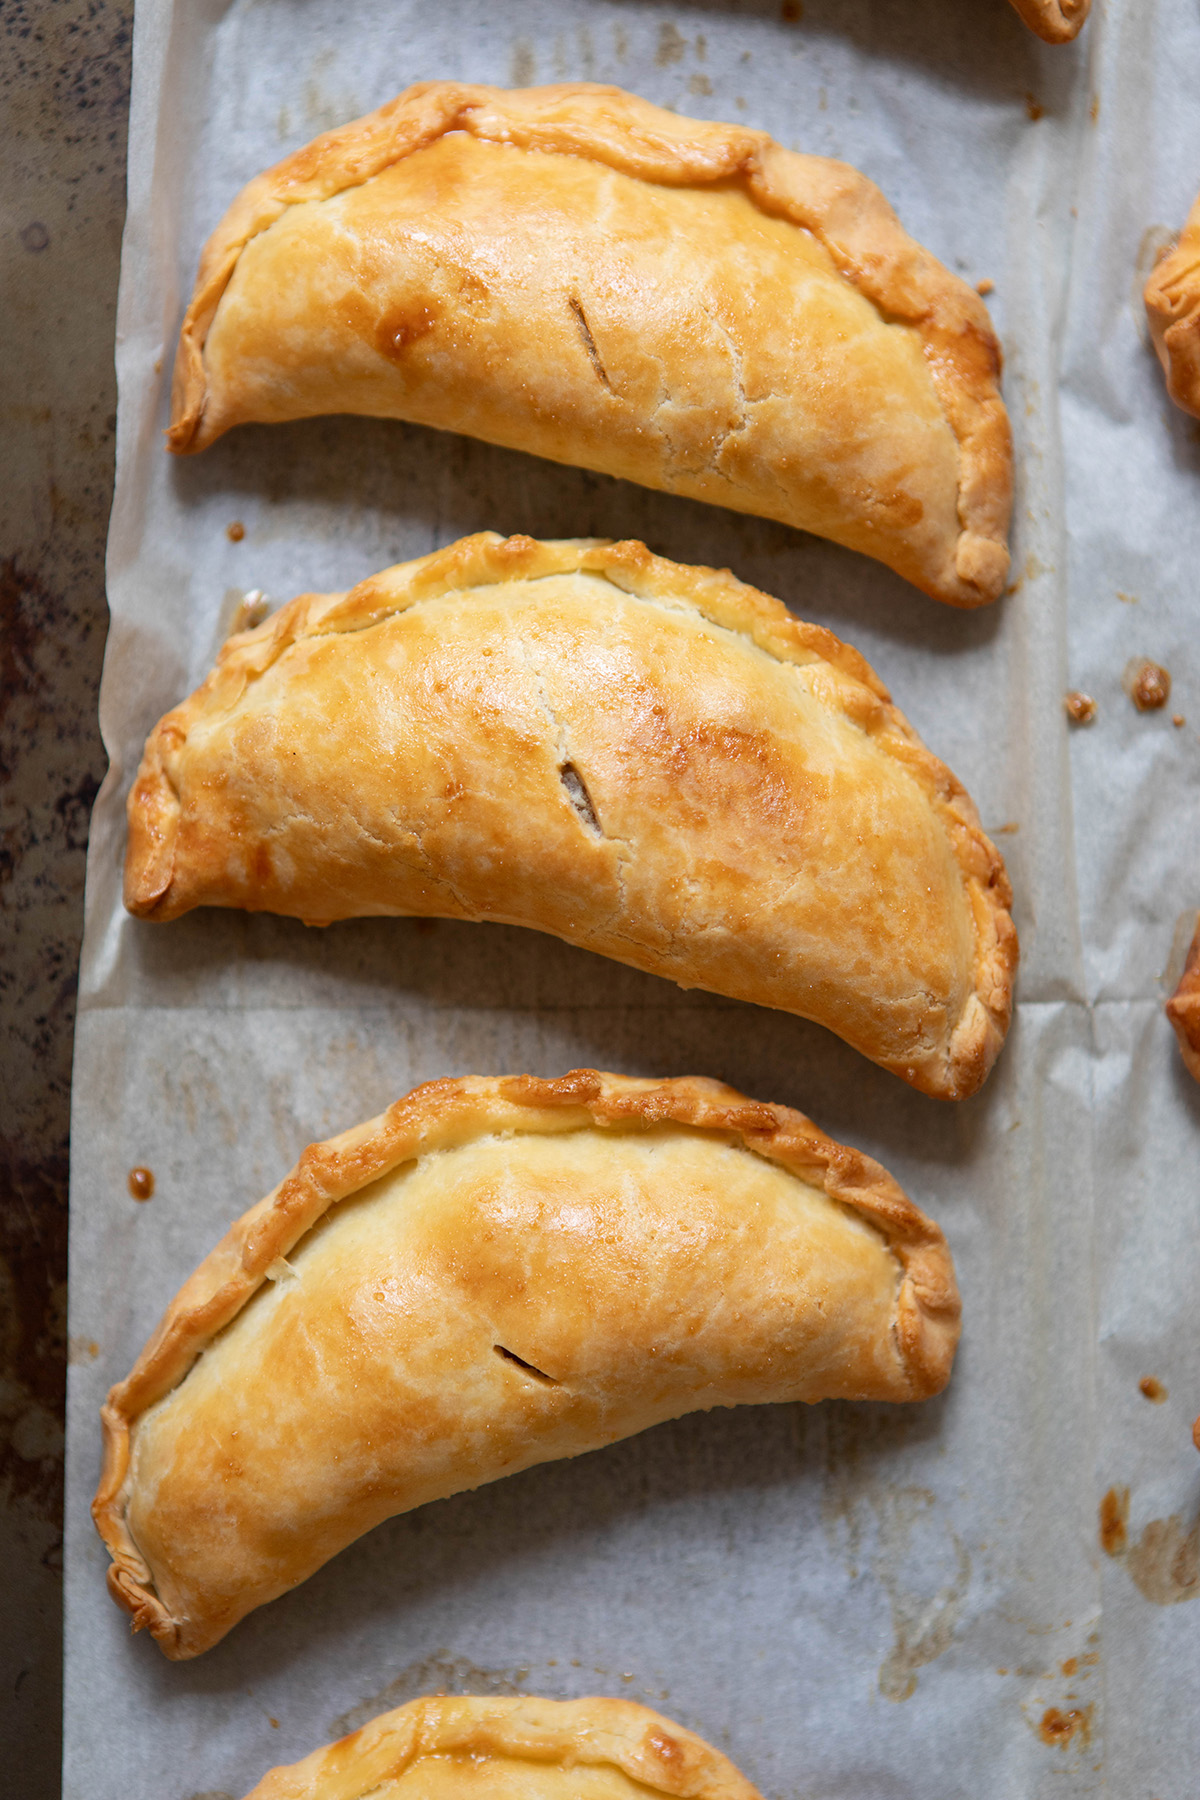 baked pasties that were frozen on parchment paper